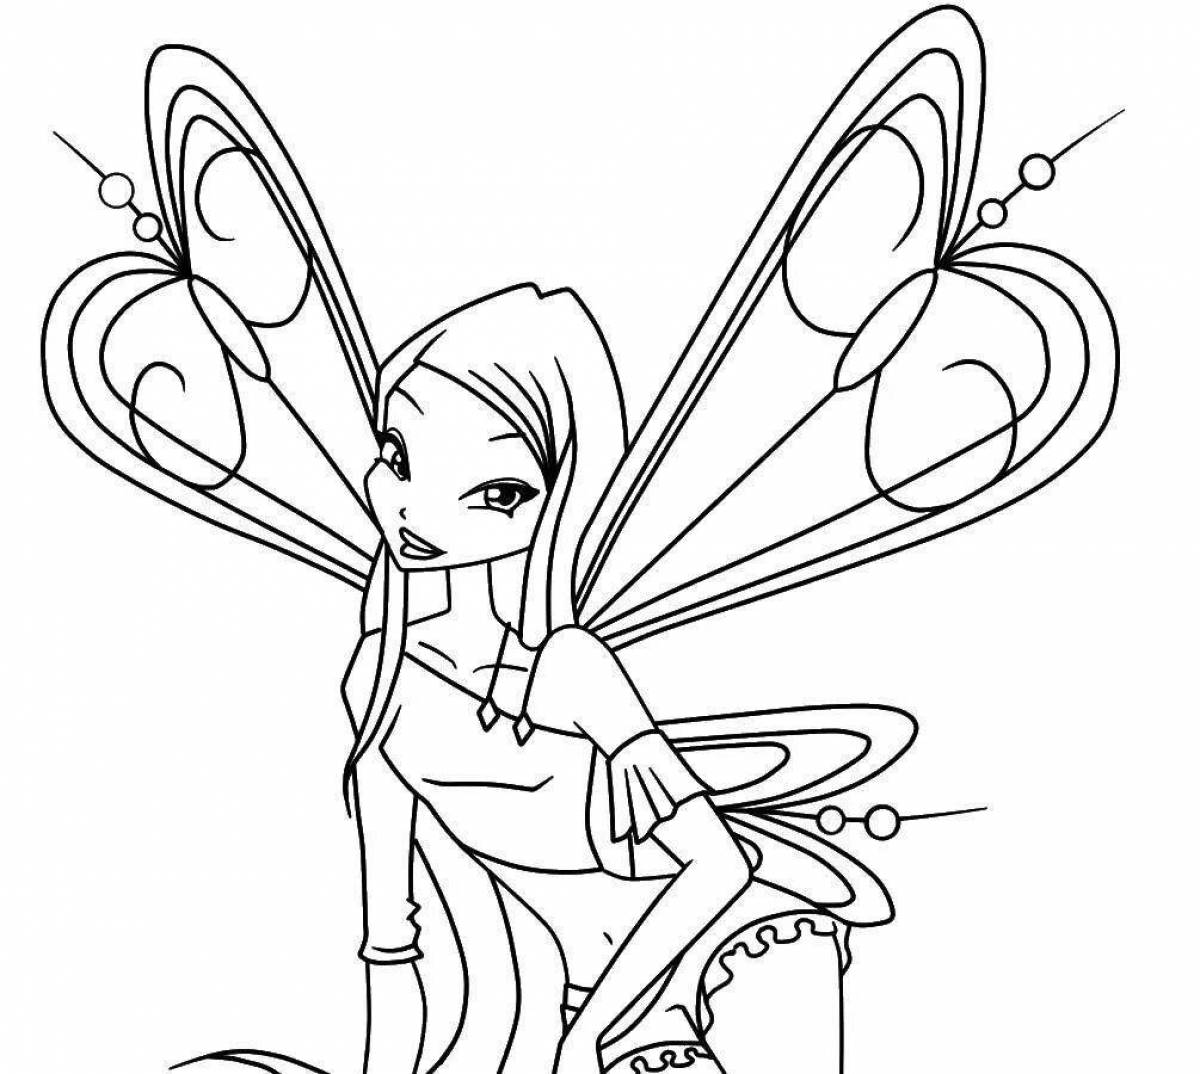 Charming roxy coloring page